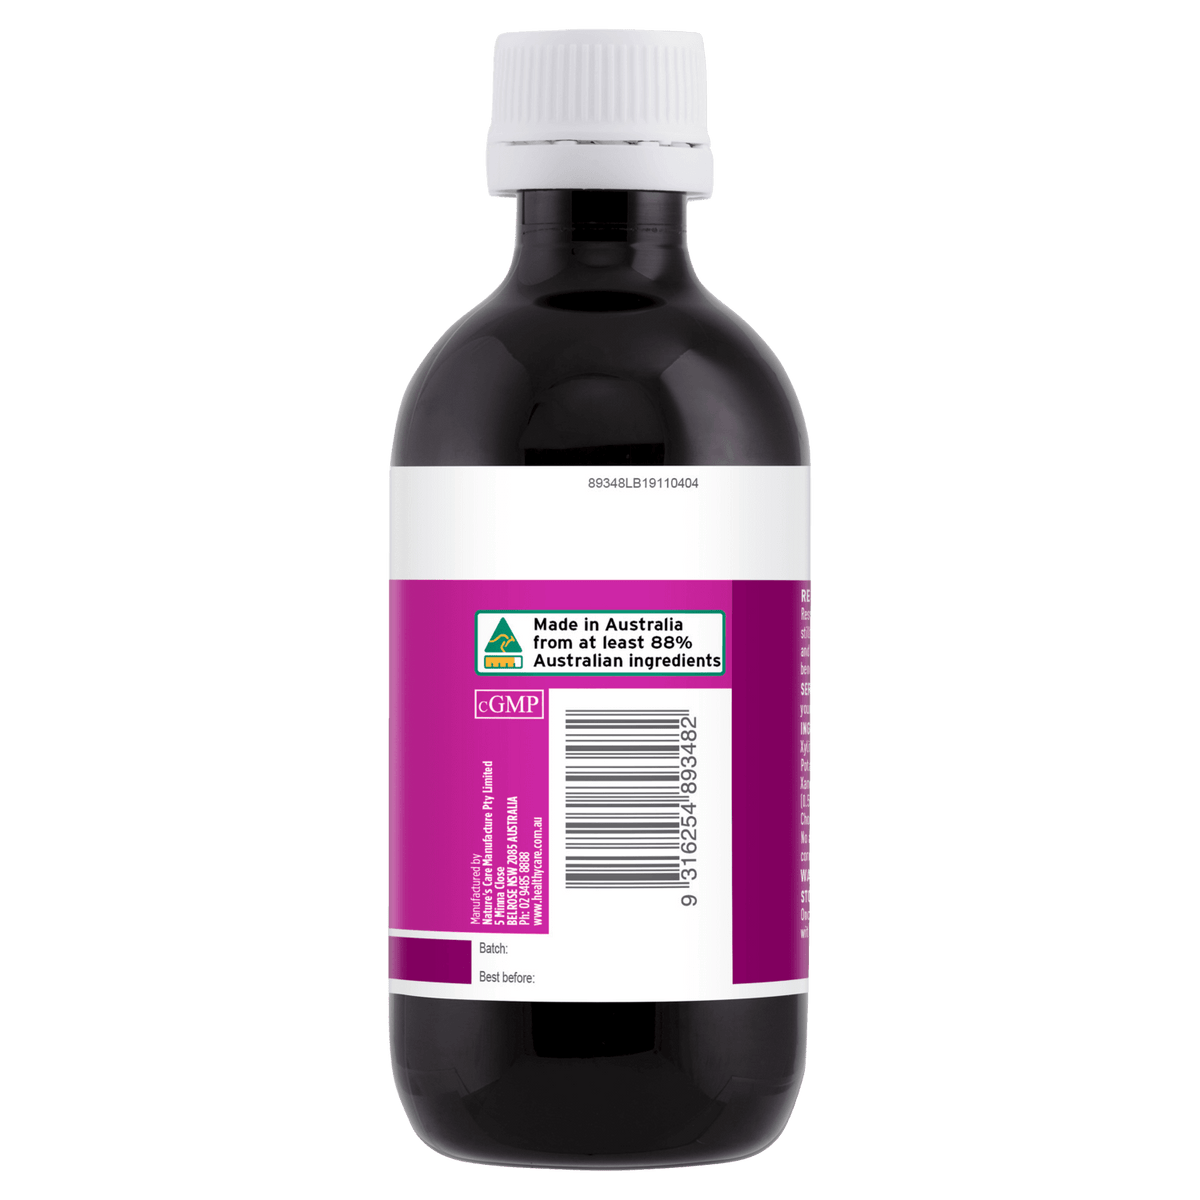 Manufacturer and Barcode of Resveratrol Liquid 200mL-Vitamins & Supplements-Healthy Care Australia